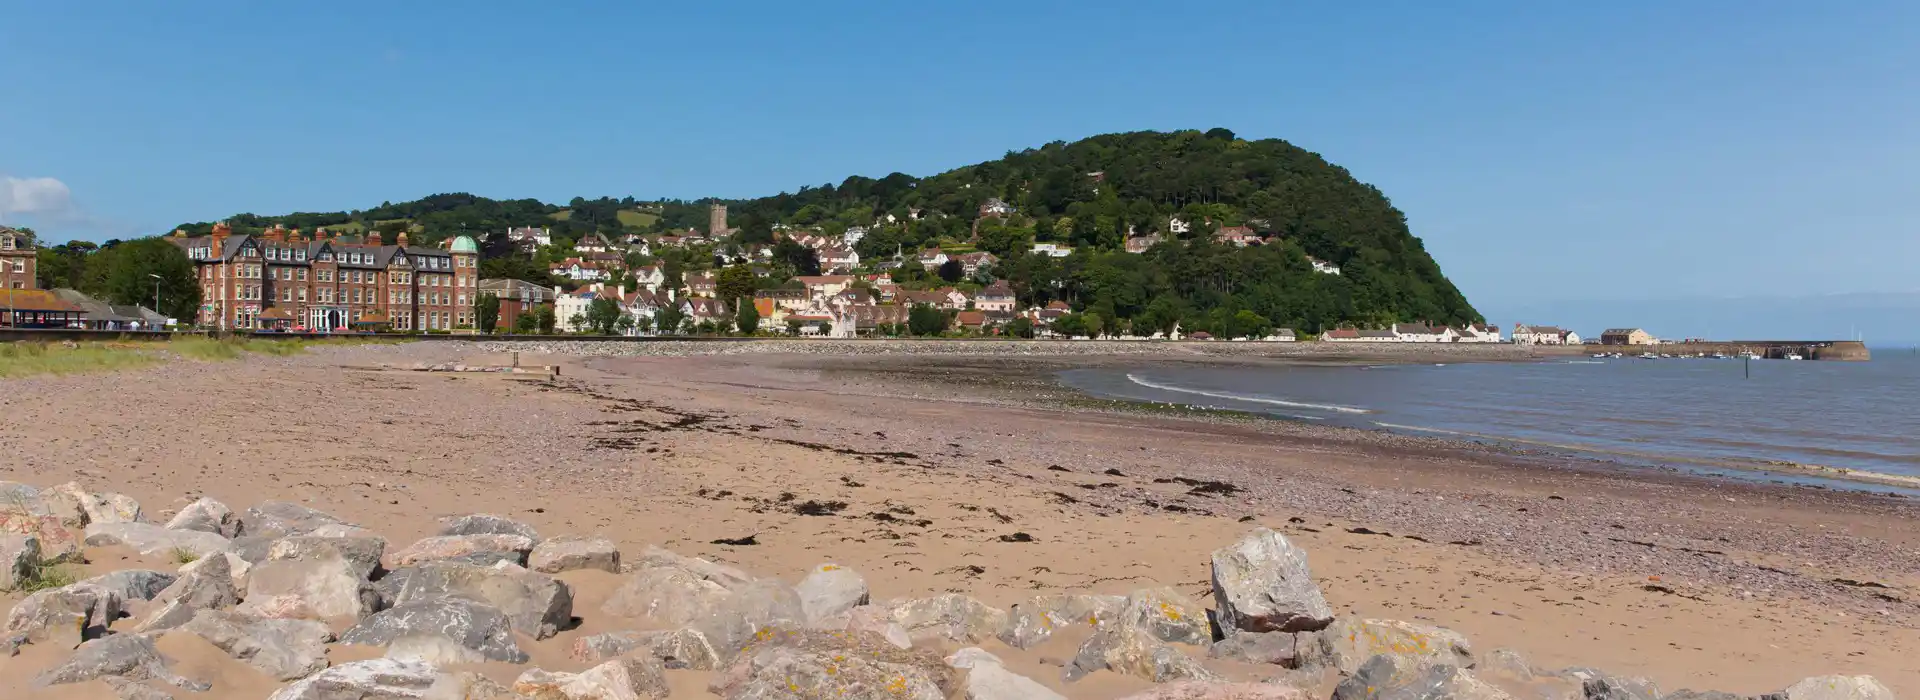 Minehead beach and seafront